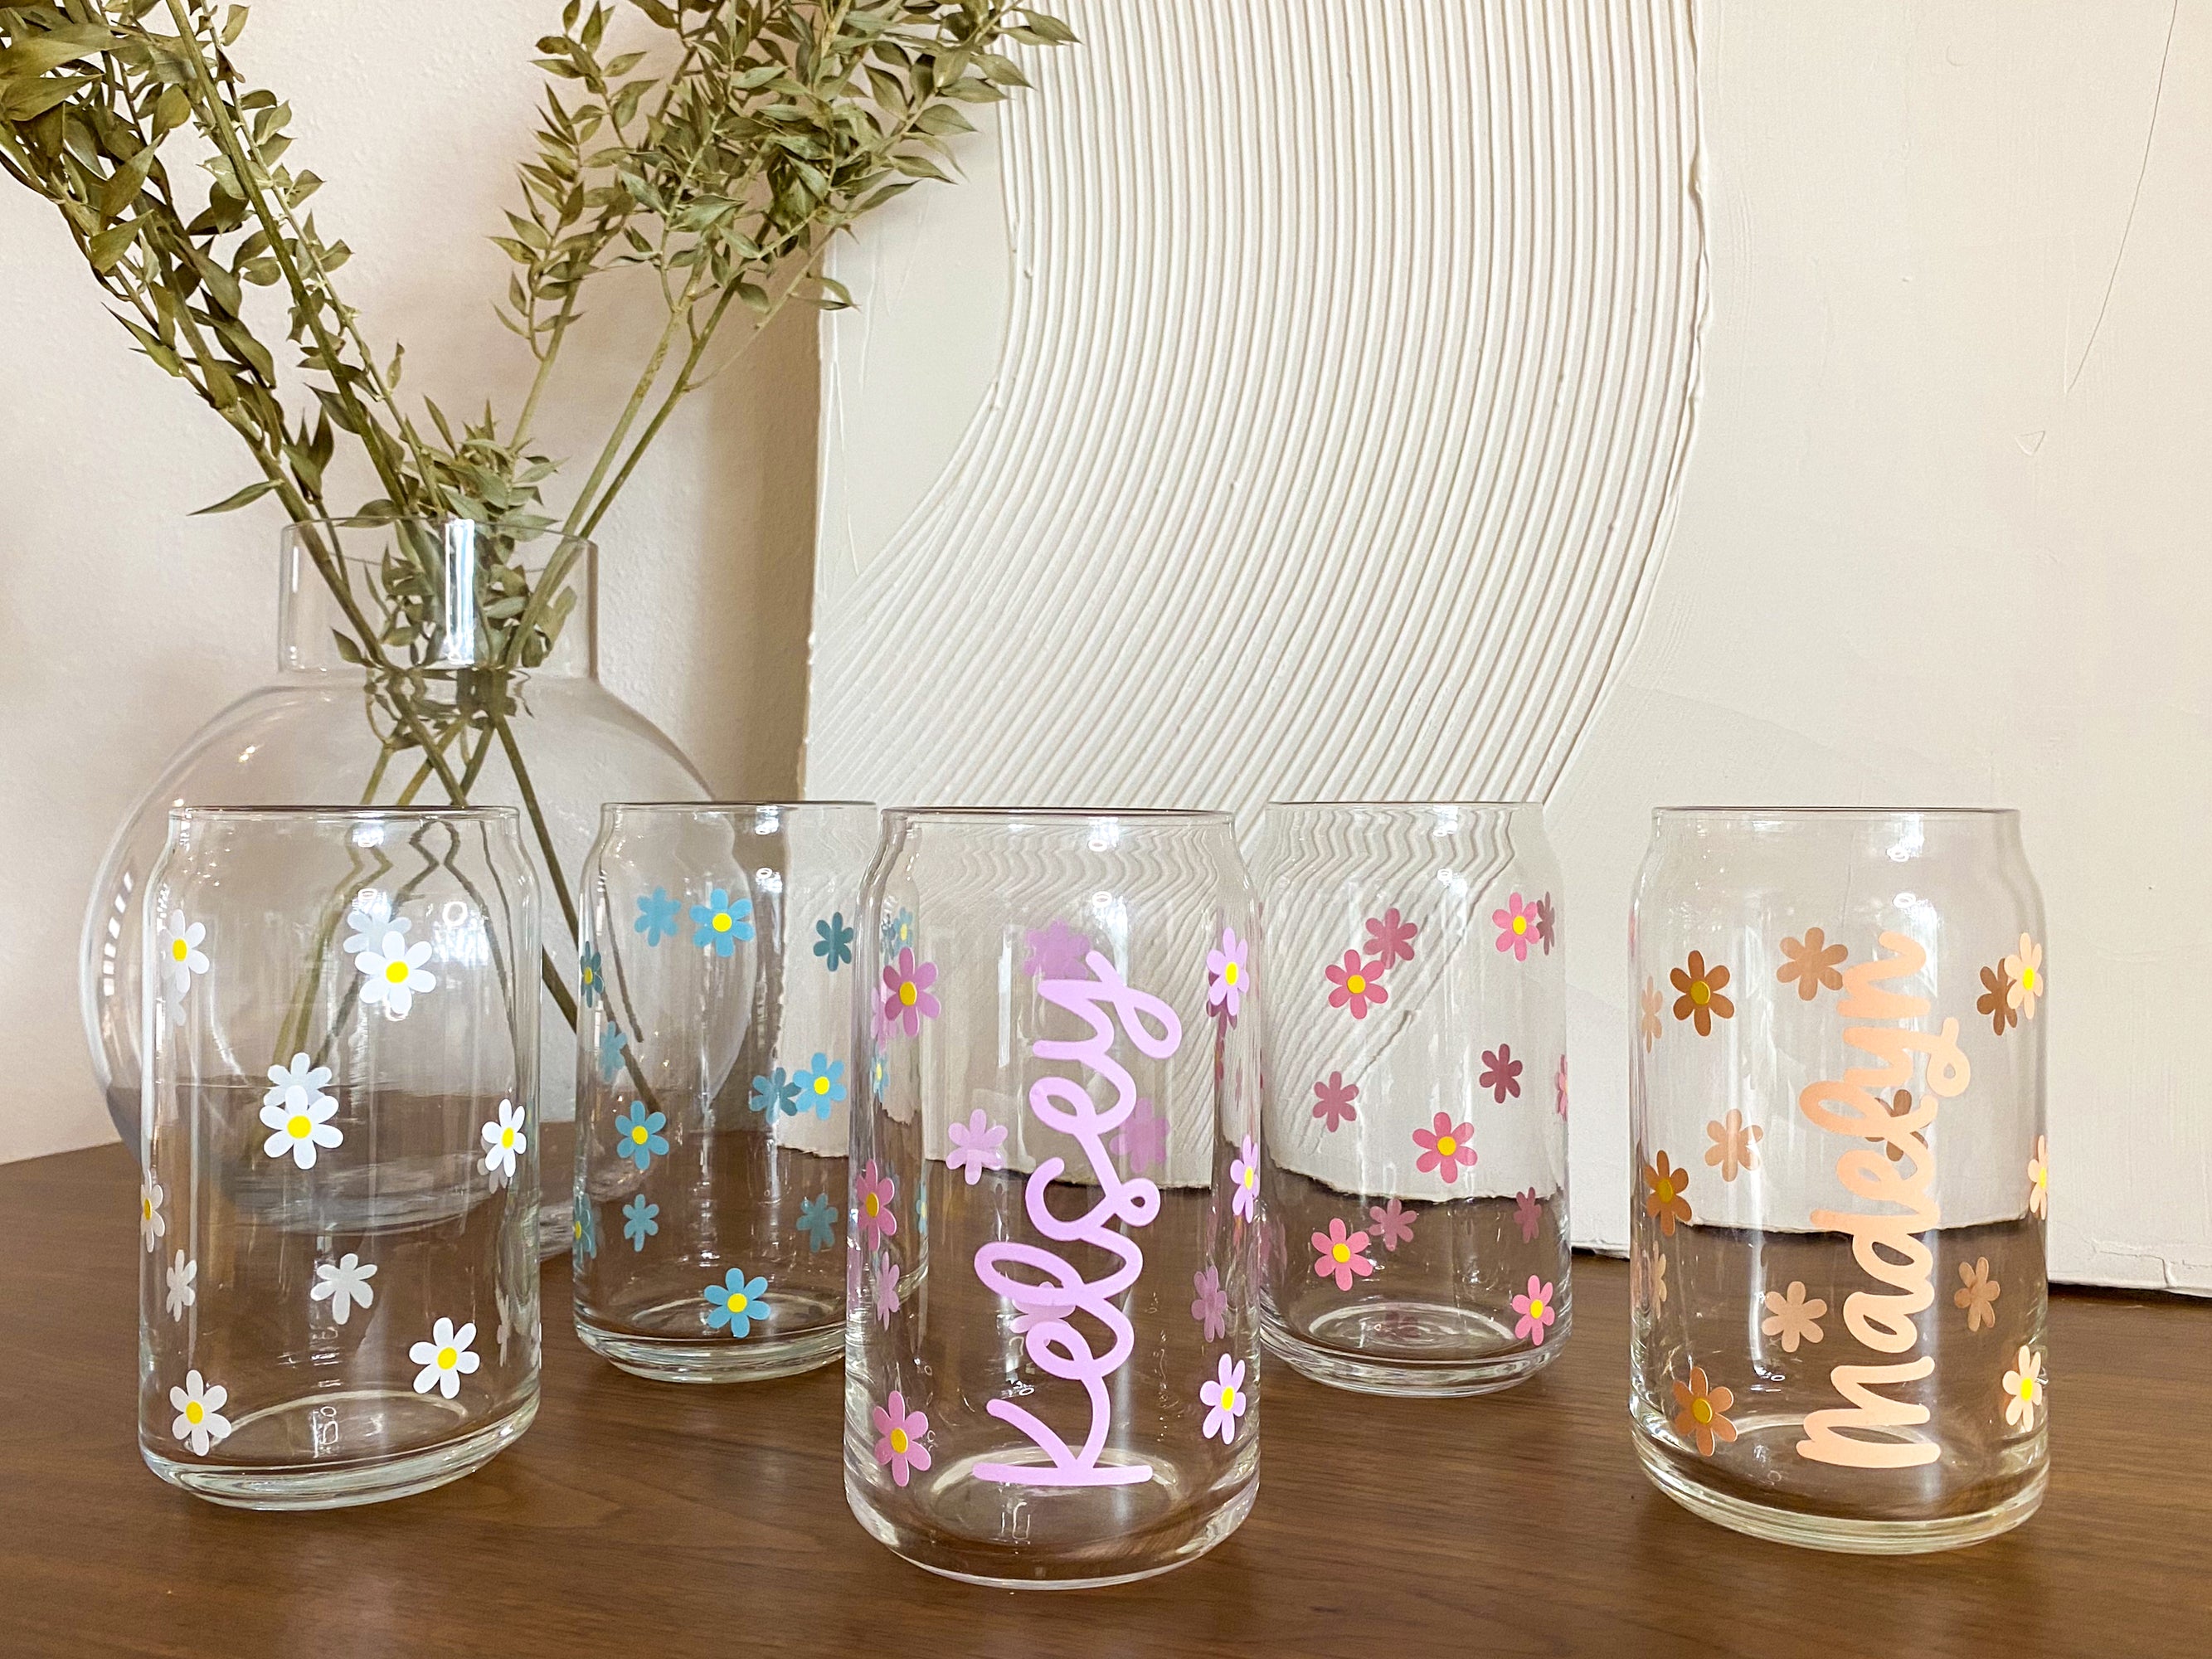 Daisy Tumbler Cup  Tumbler cups diy, Tumbler cups personalized